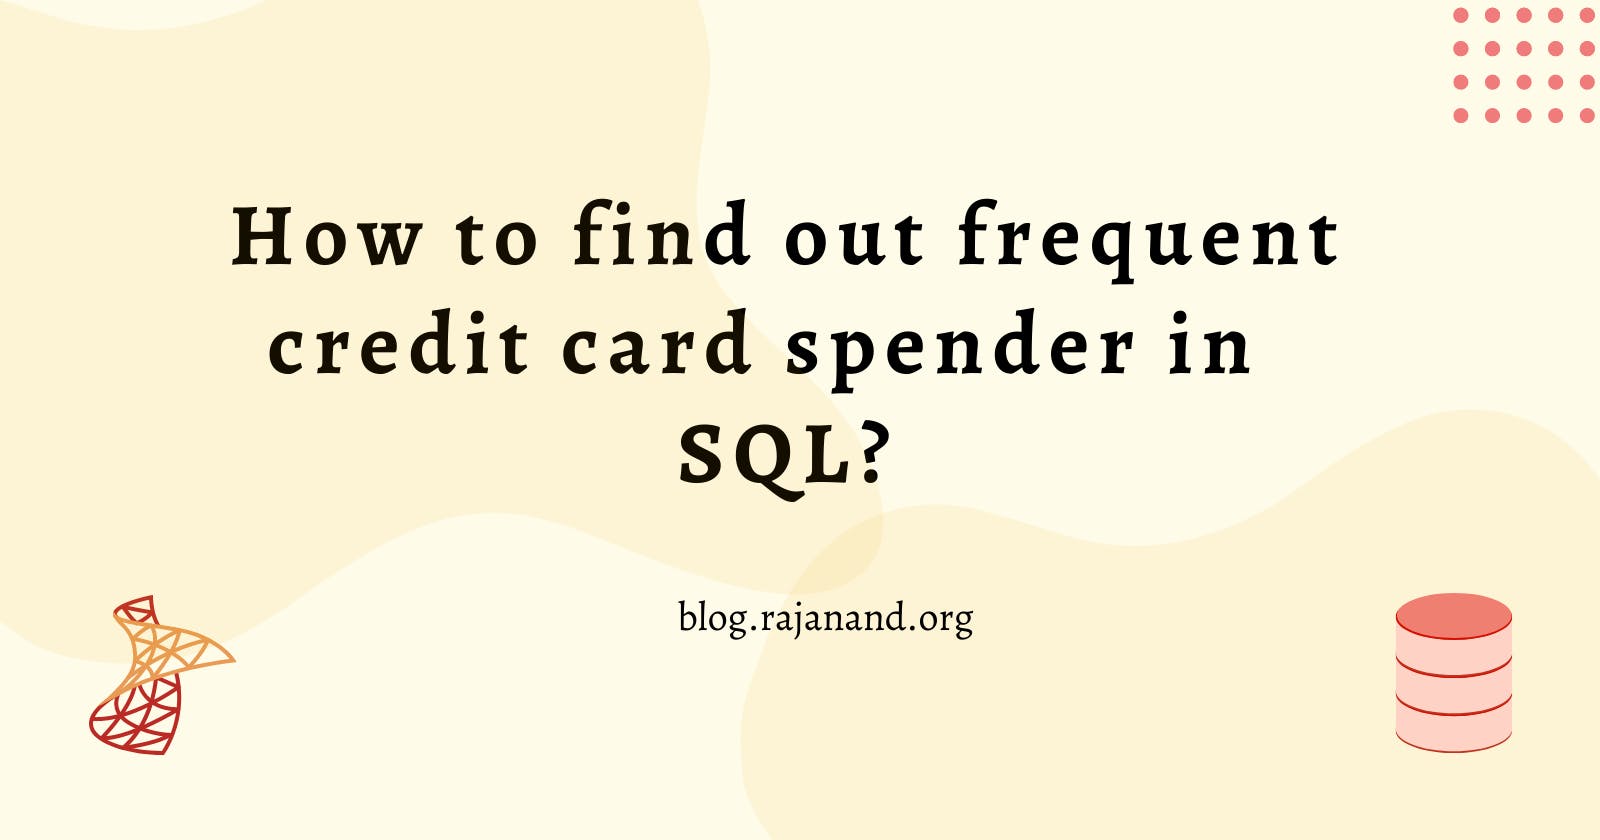 How to find out frequent credit card spender in SQL?